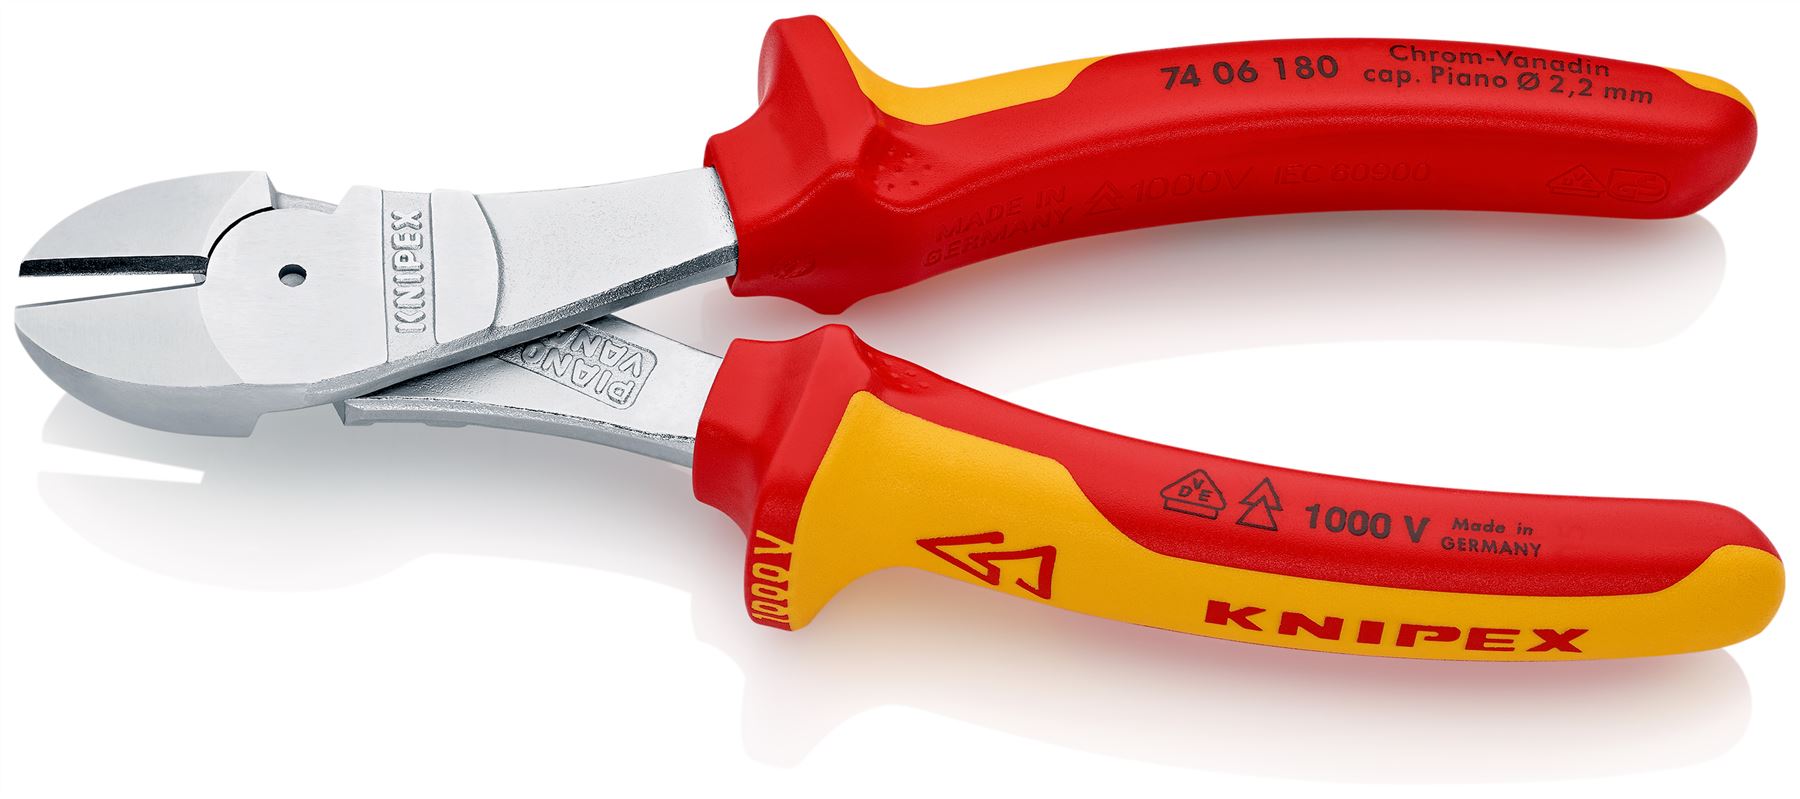 KNIPEX Diagonal Cutting Pliers High Leverage Side Cutters 180mm VDE Multi Component Grips 74 06 180 SB